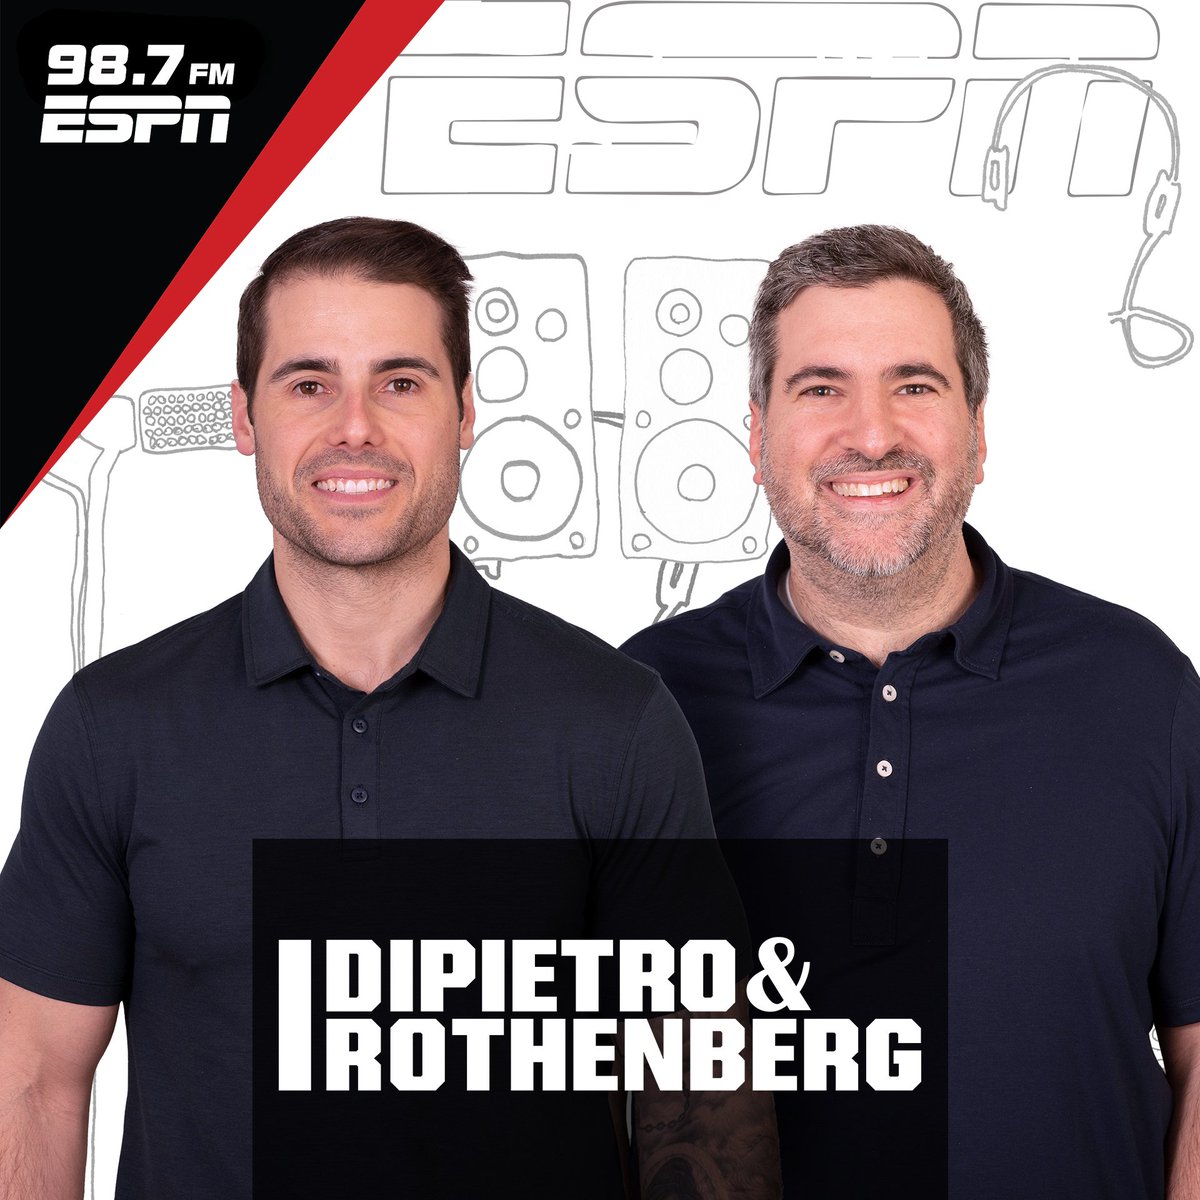 SHOW TIME! @HDumpty39 & @RothenbergESPN are on the air! The #Knicks win Game 2 in the final seconds to put them up 2-0 over the Sixers! Also, the Zach Wilson era is over for the #Jets! Listen on @ESPNNY98_7FM, the ESPN New York app or bit.ly/ListenESPNNY.